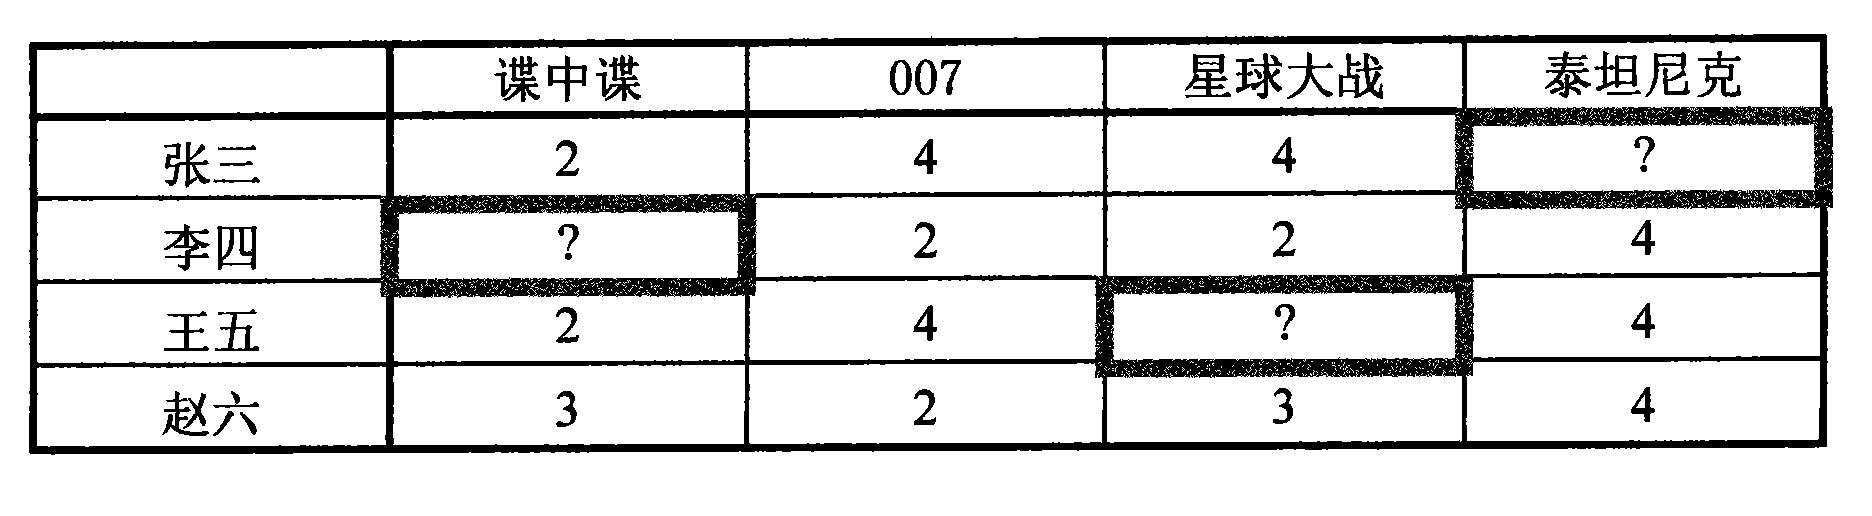 Collaborative filtering recommending method and system based on client characteristics